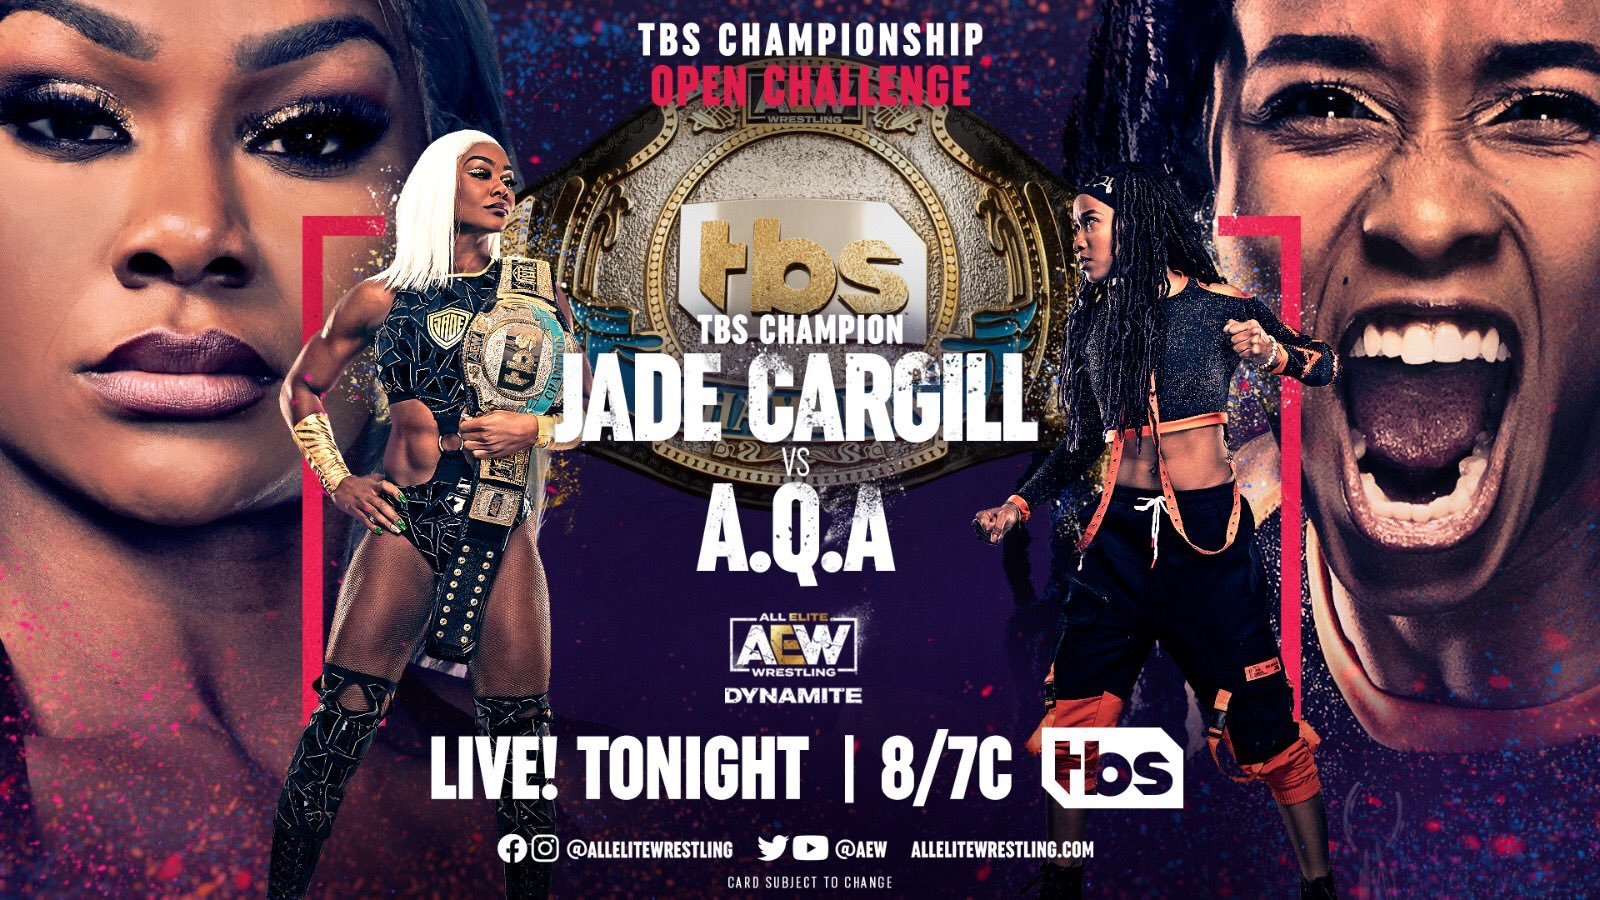 Tony Khan Announces TBS Championship Open Challenge Match For Tonight’s AEW Dynamite